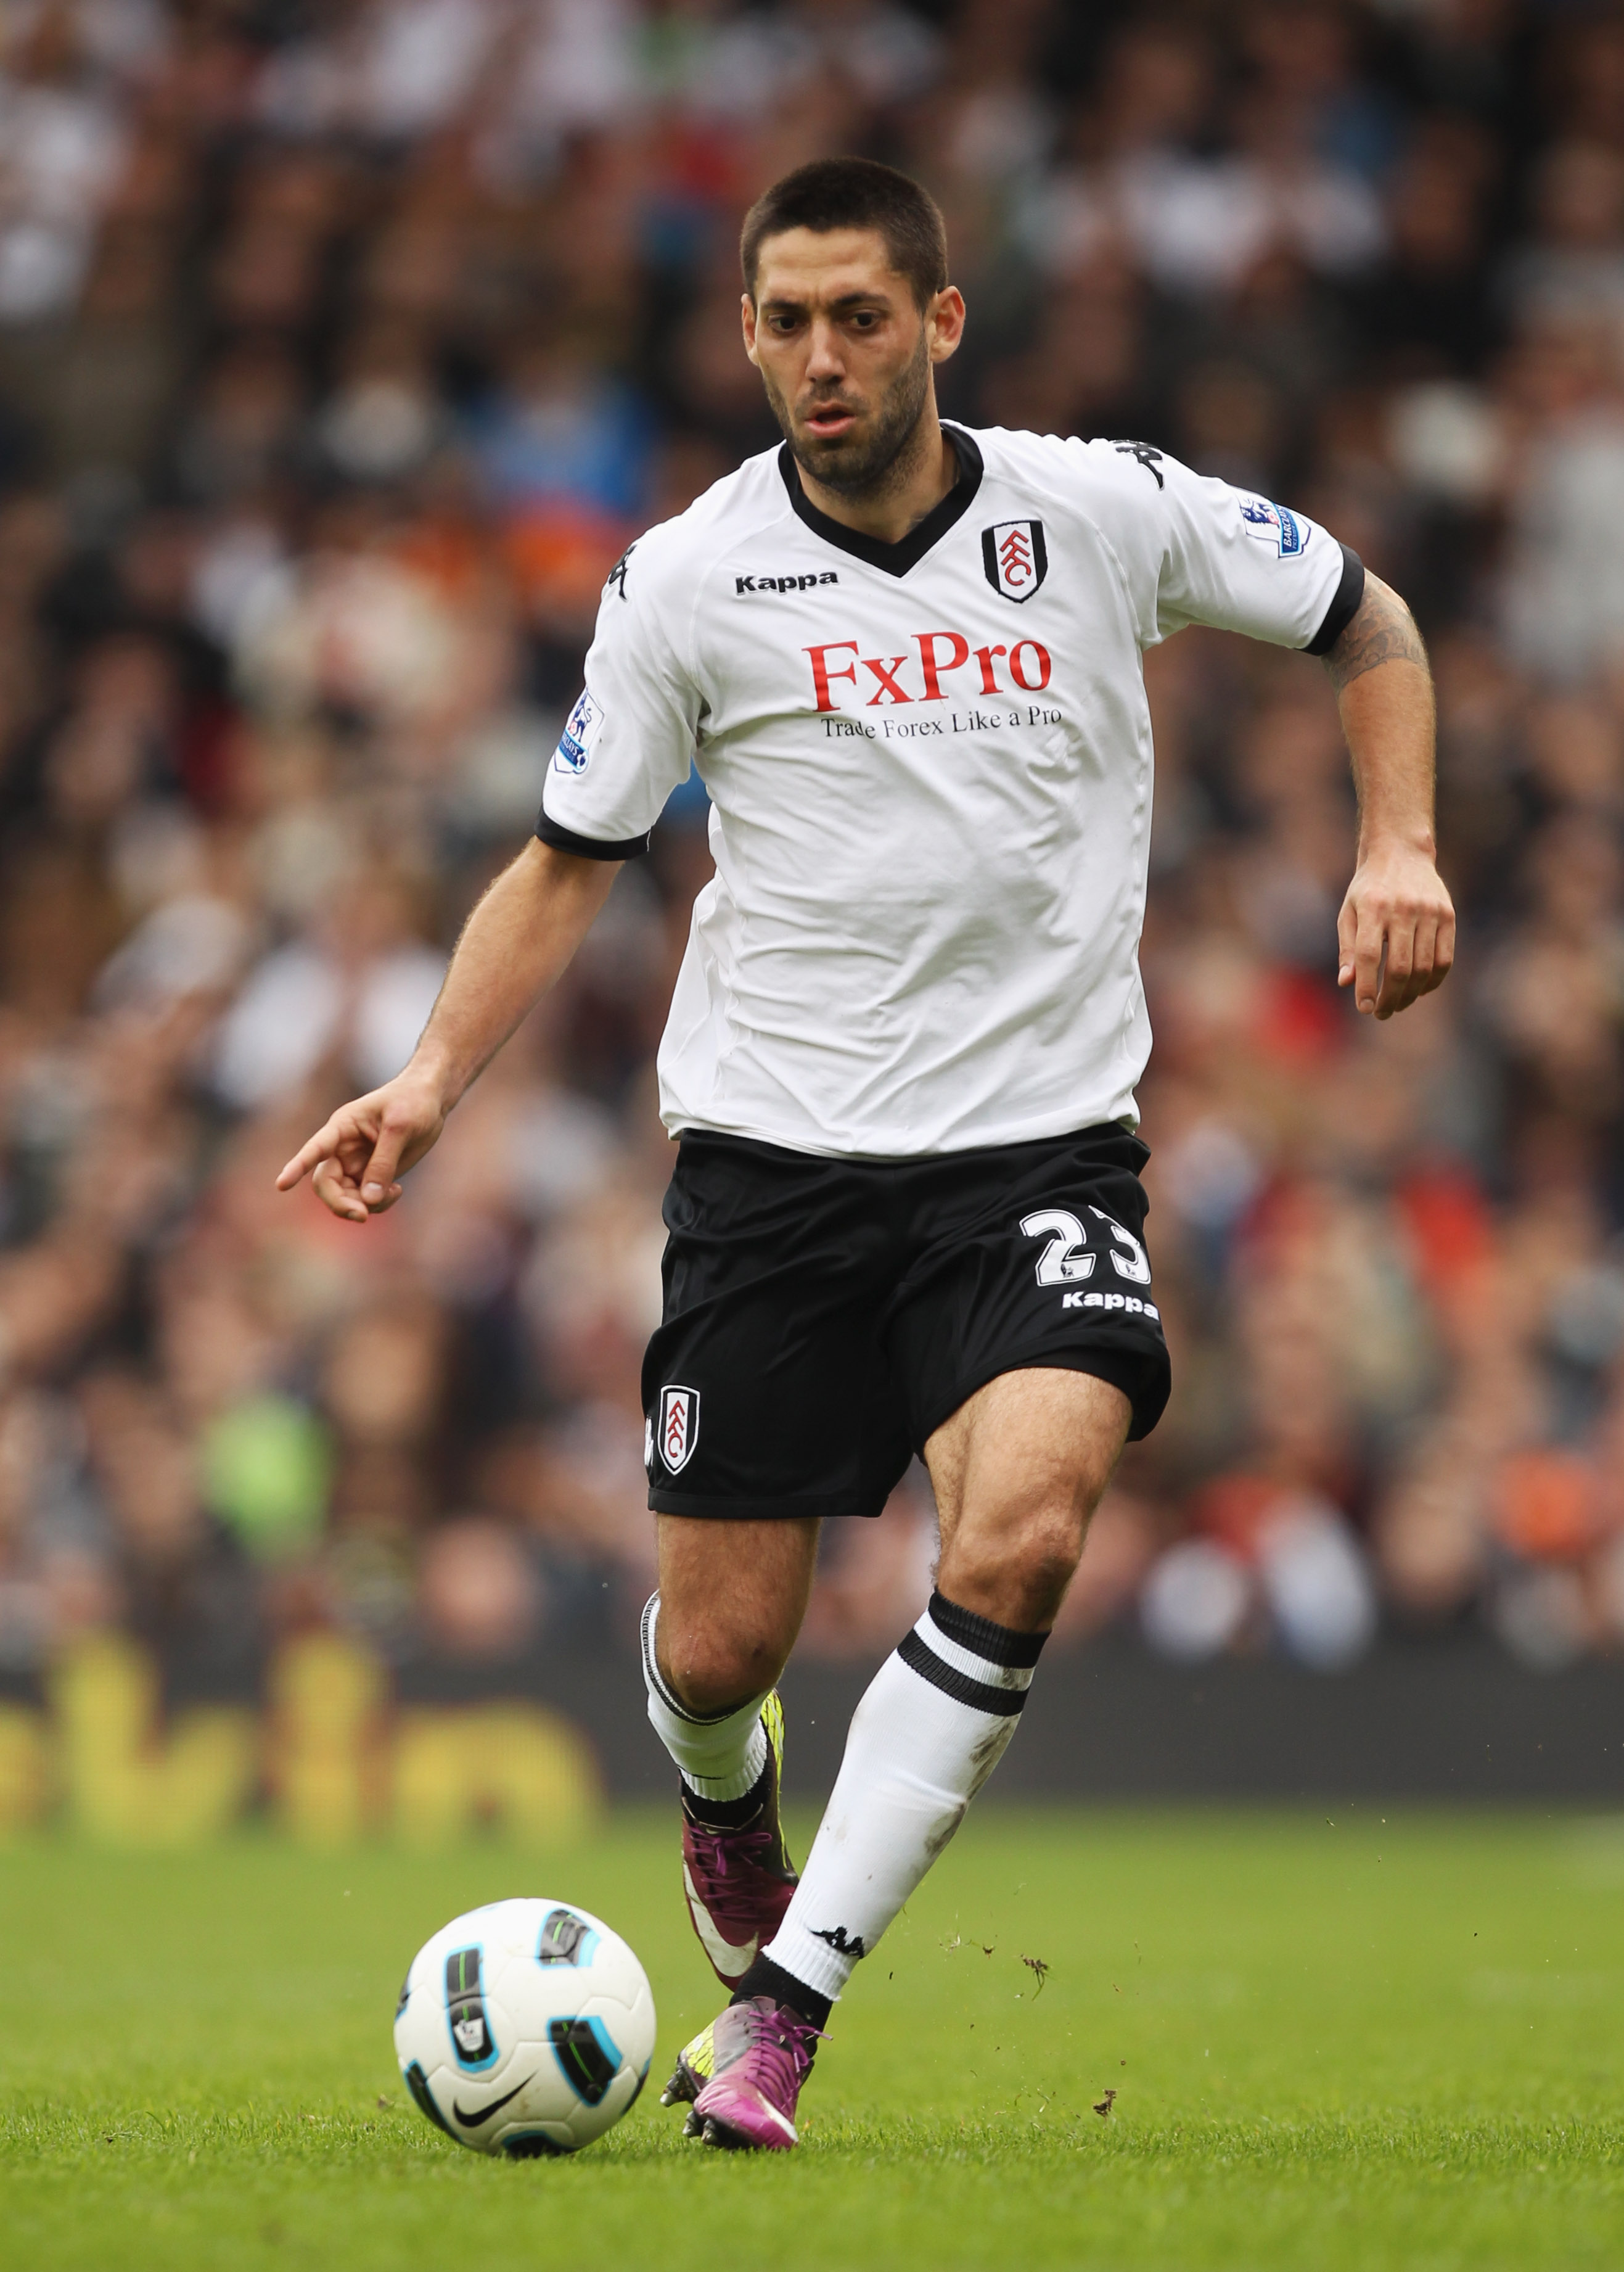 LONDON, ENGLAND - APRIL 03:  Clint Dempsey of Fulham in action during the Barclays Premier League match between Fulham and Blackpool at Craven Cottage on April 3, 2011 in London, England.  (Photo by Ian Walton/Getty Images)